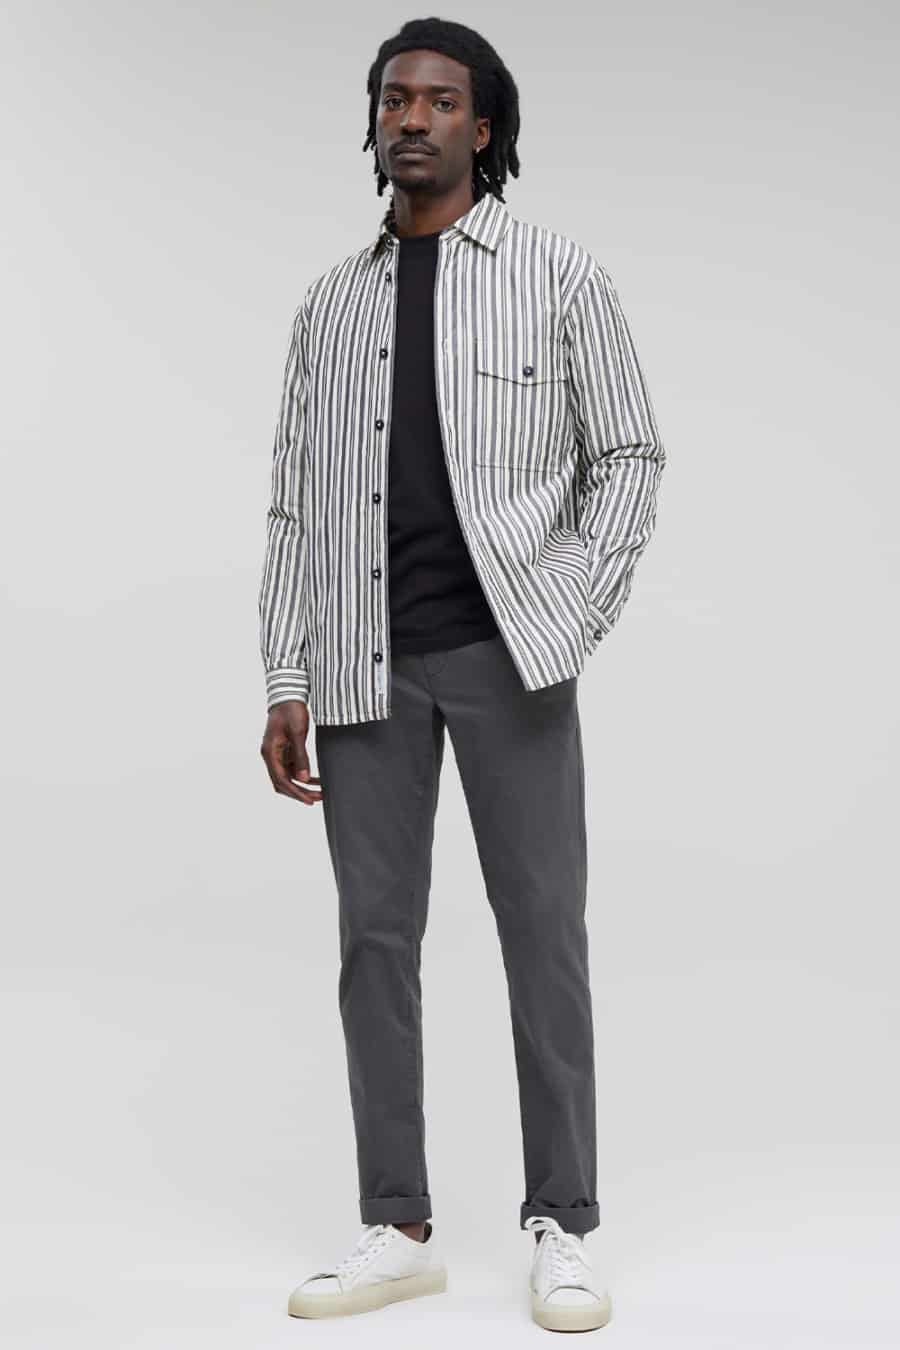 Men's grey chinos, black T-shirt, striped overshirt and white sneakers outfit